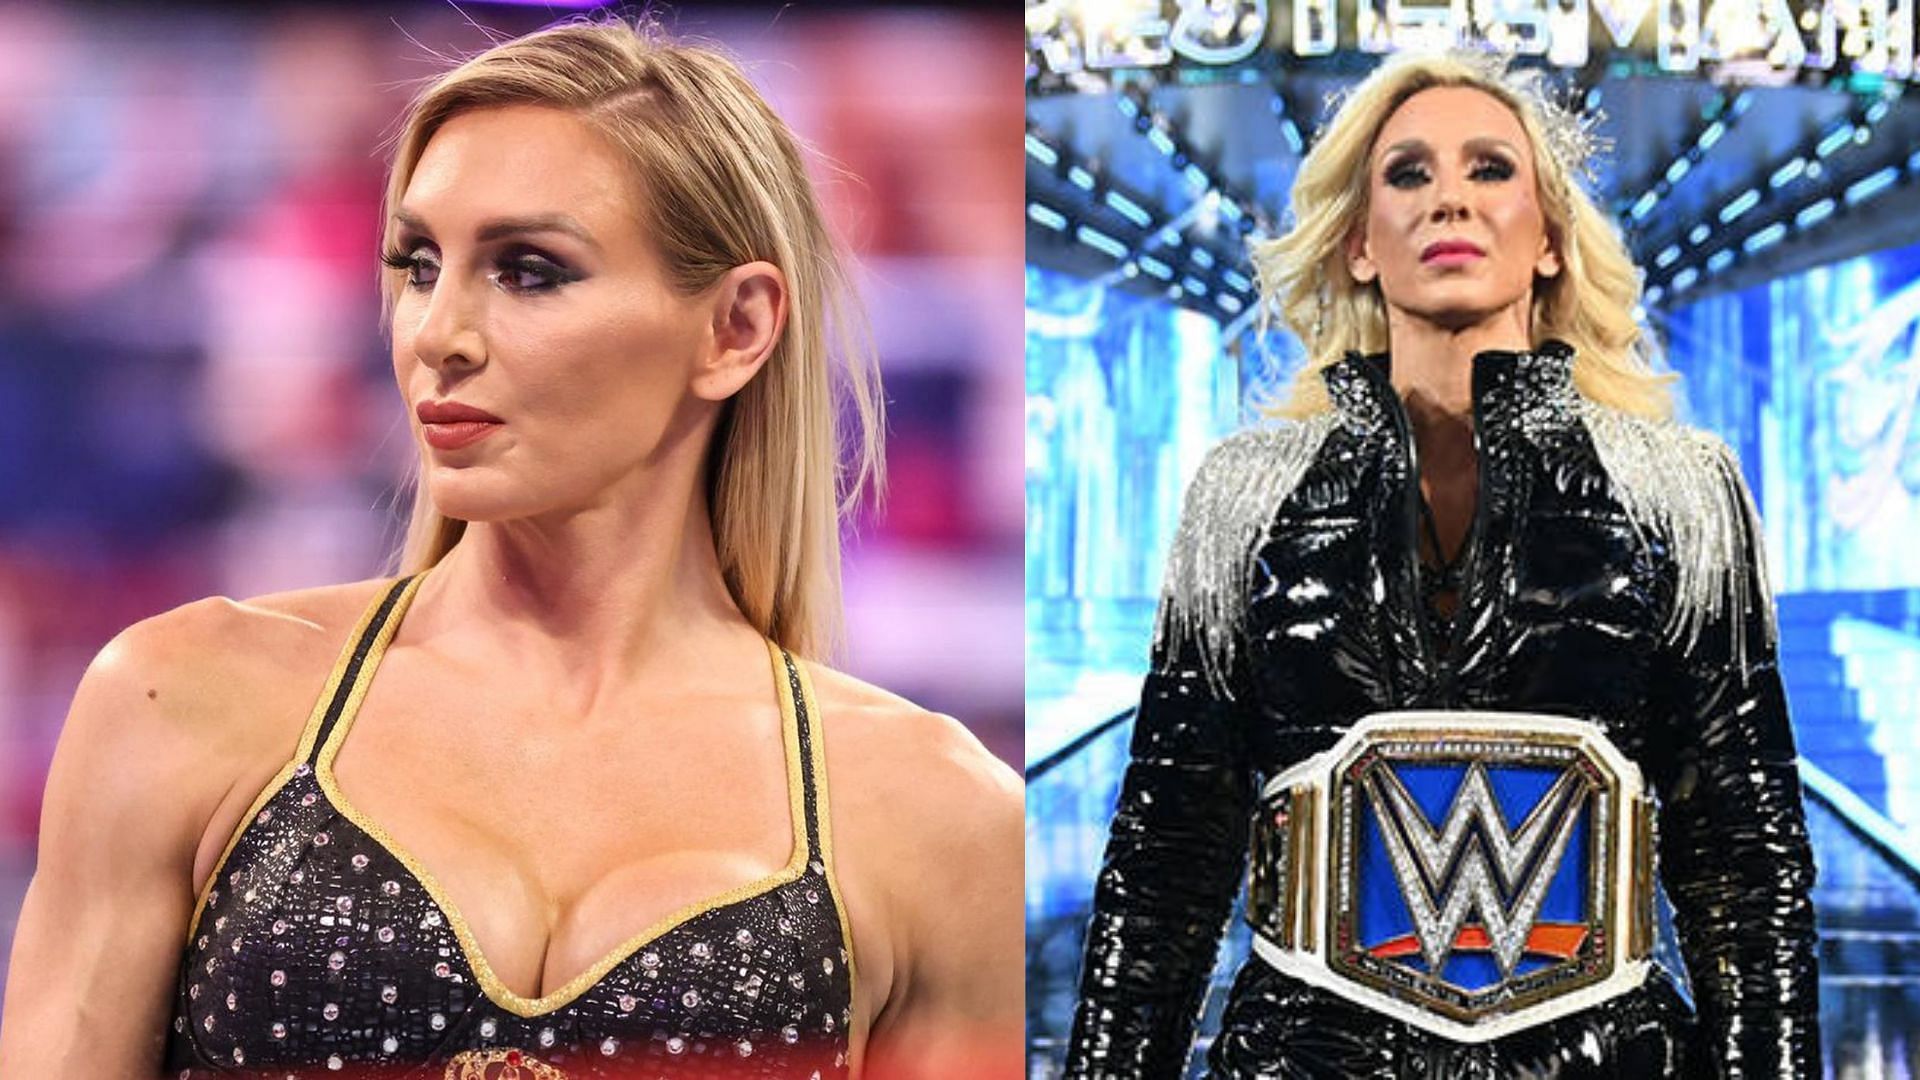 Charlotte Flair has been absent from WWE for two months